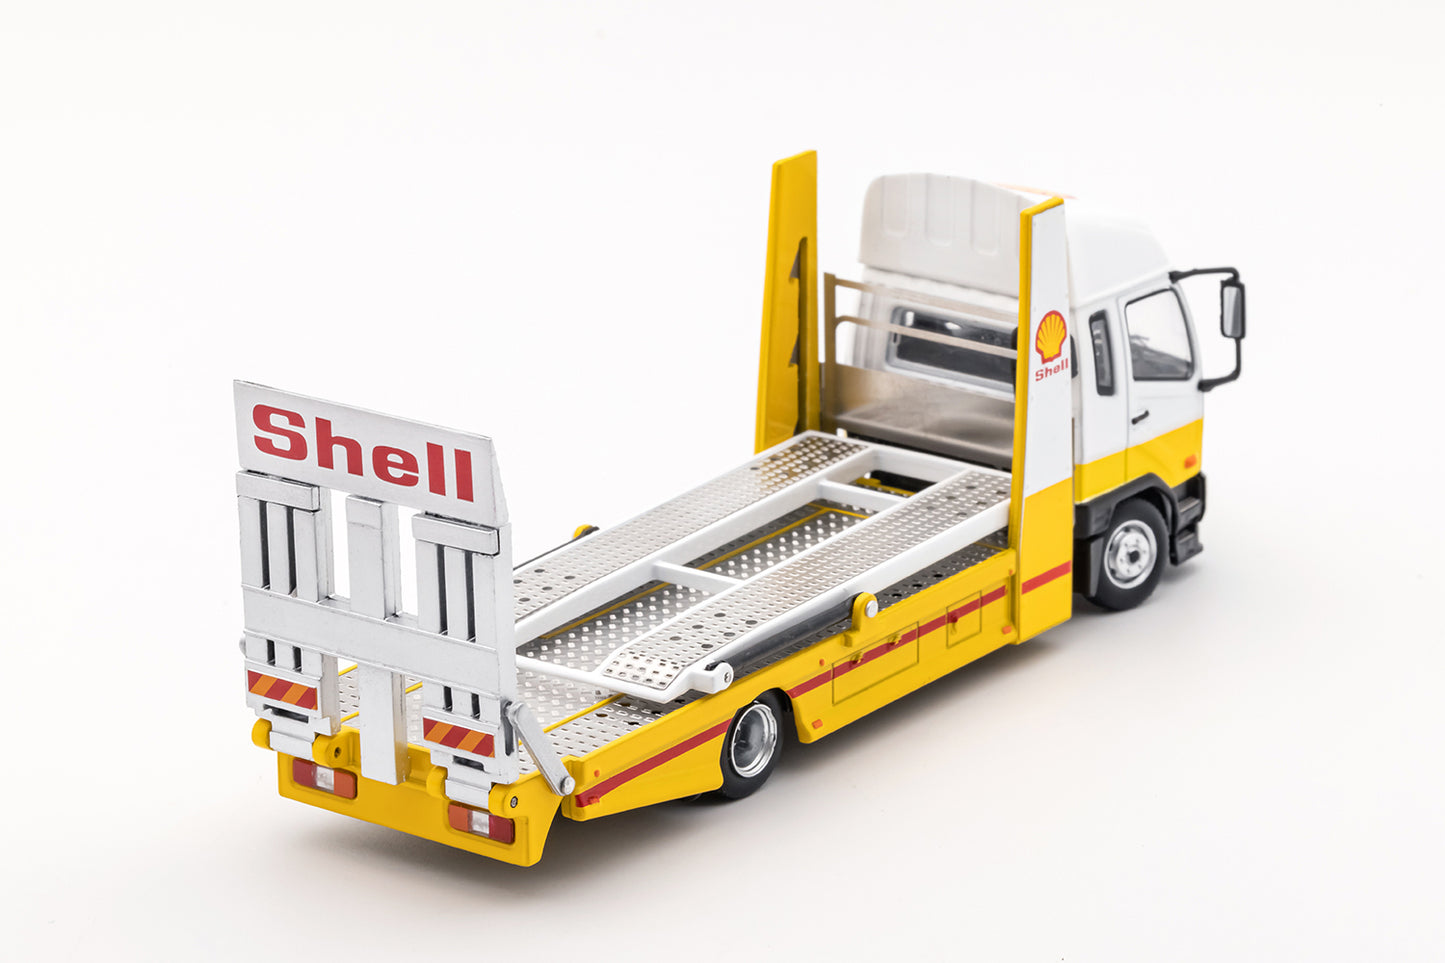 GCD 1/64 Mitsubishi Fuso Double Decker Transport Truck in Shell Livery